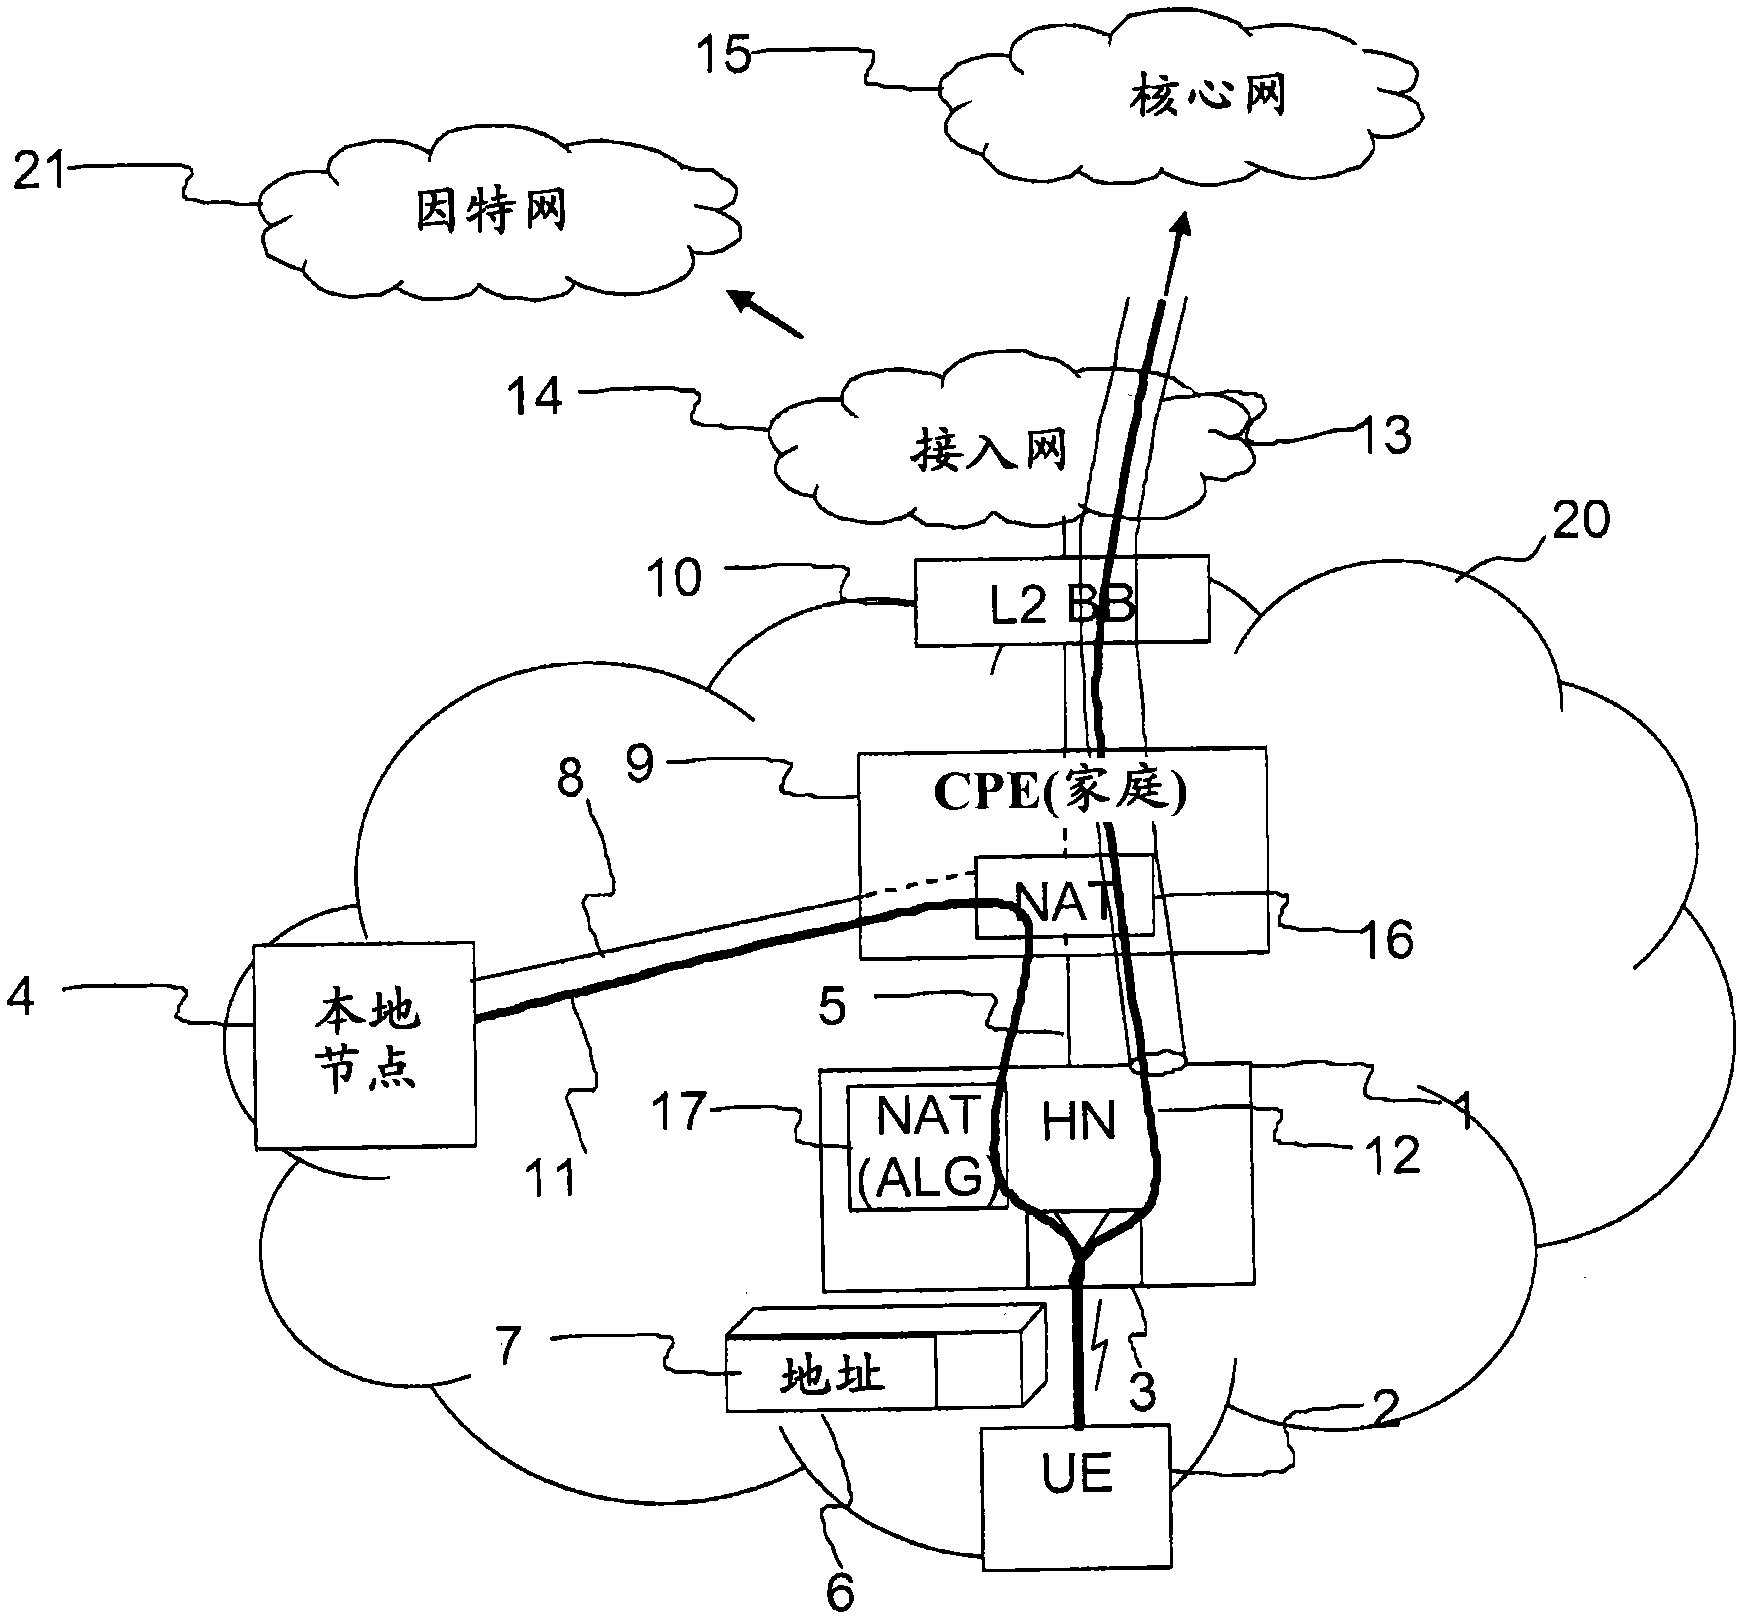 Method for enabling a home base station to choose between local and remote transportation of uplink data packets